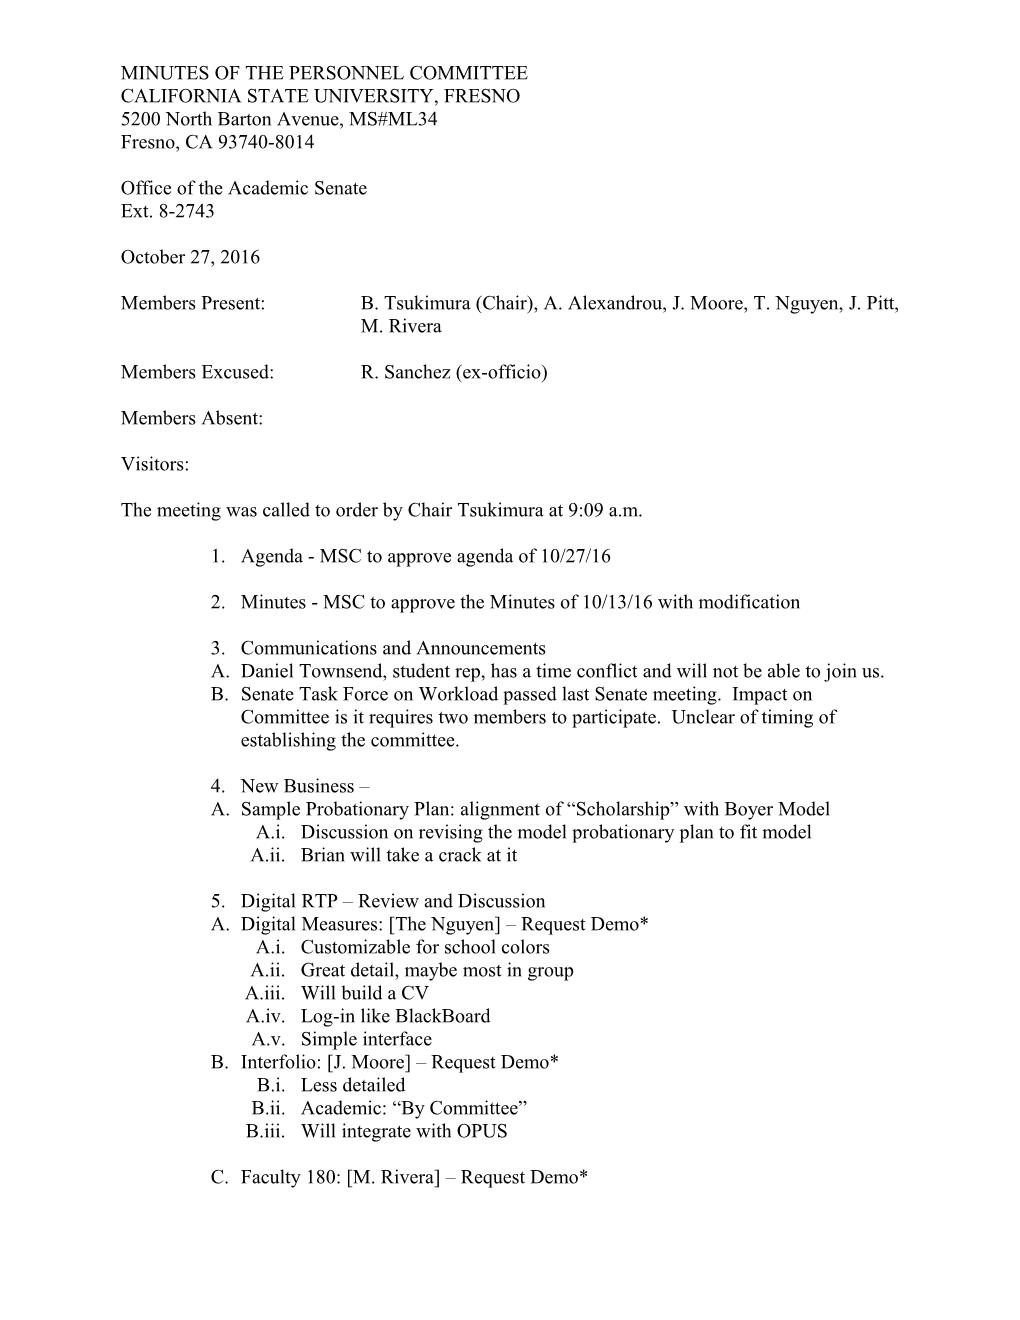 Minutes of the Personnel Committee s1